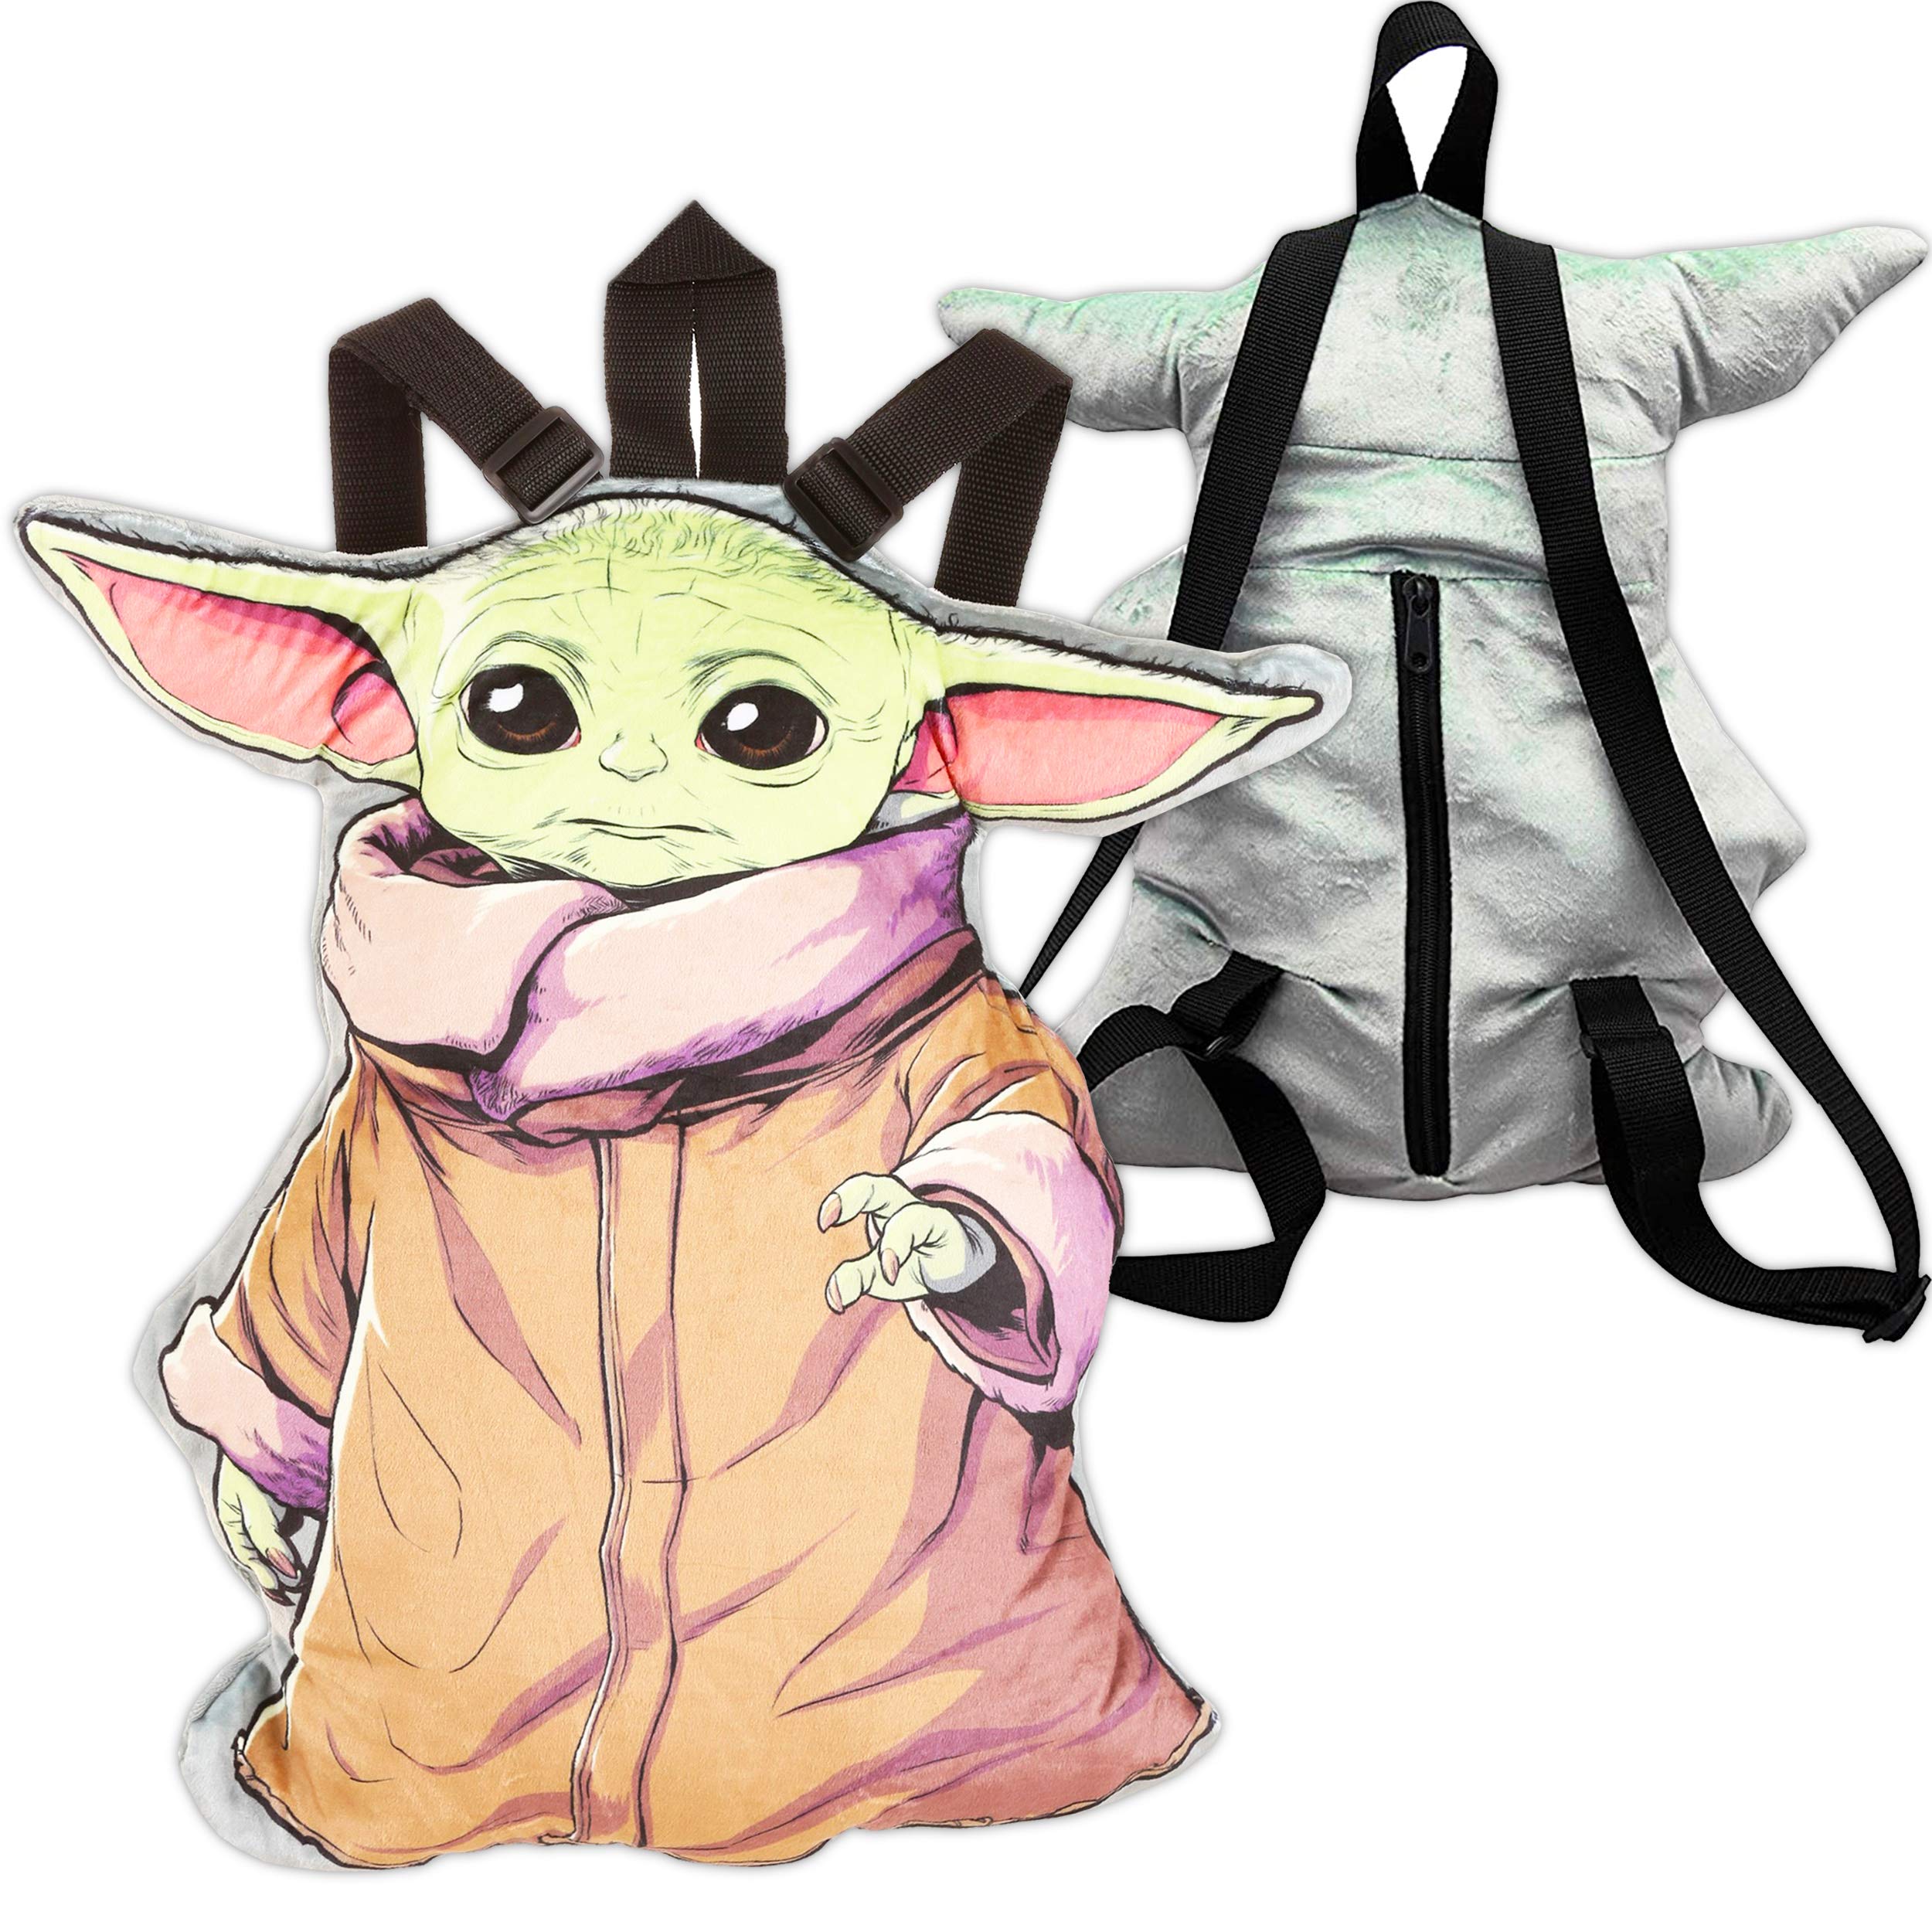 Star Wars Plush Backpack - Baby Yoda Backpack for Boys Girls Bundle with Stickers, More | Mandalorian Backpack Mini